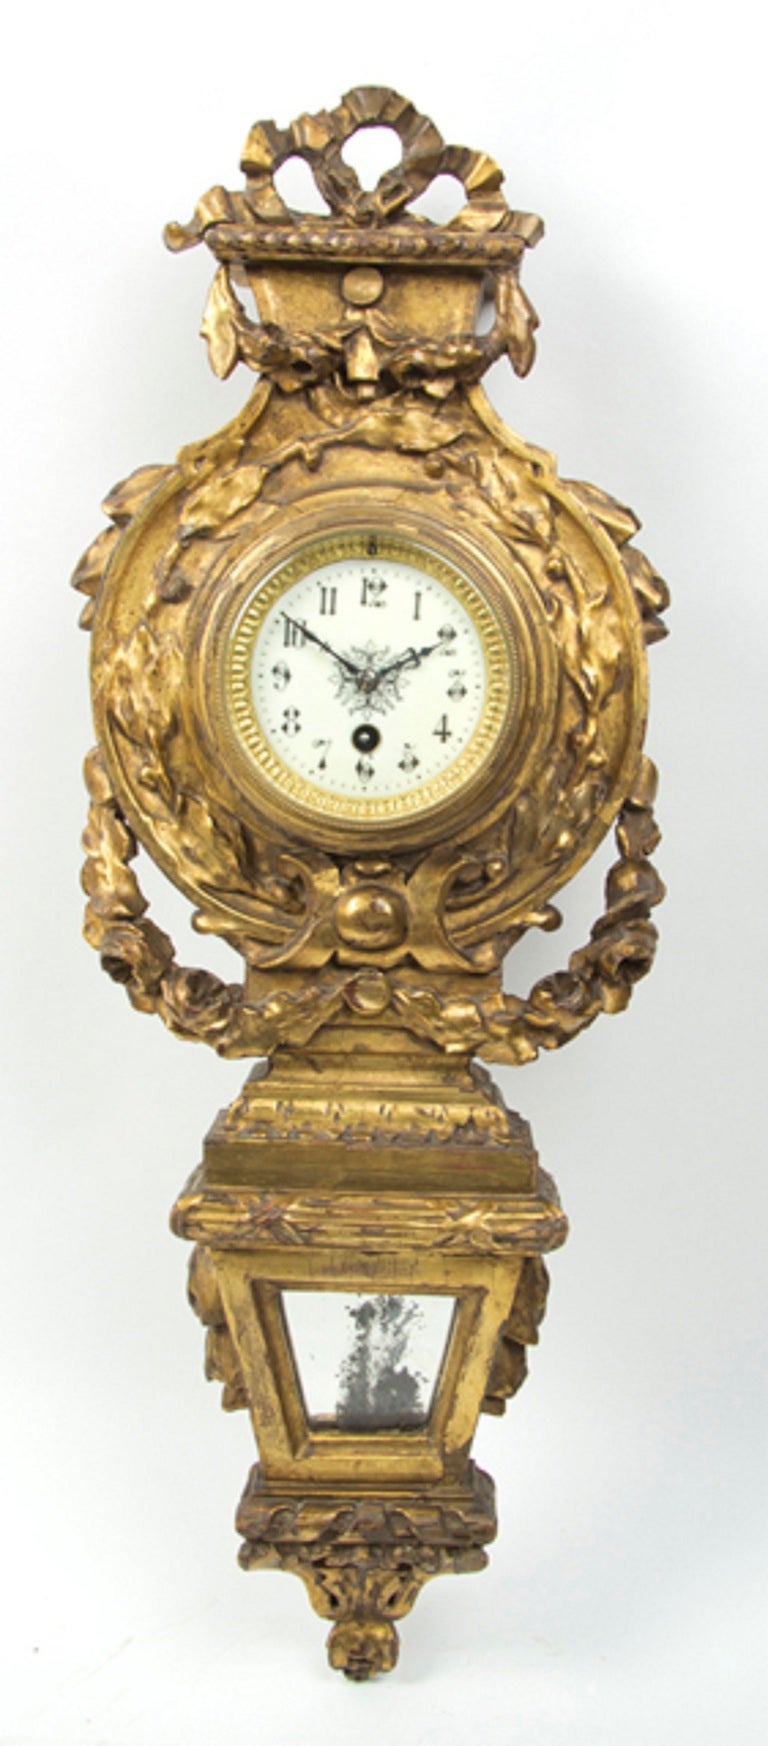 Neoclassical giltwood Cartel clock, the case carved with a ribbon-tied crest over the circular dial with Arabic numerals within a conforming bezel, having time only movement, late 19th century.